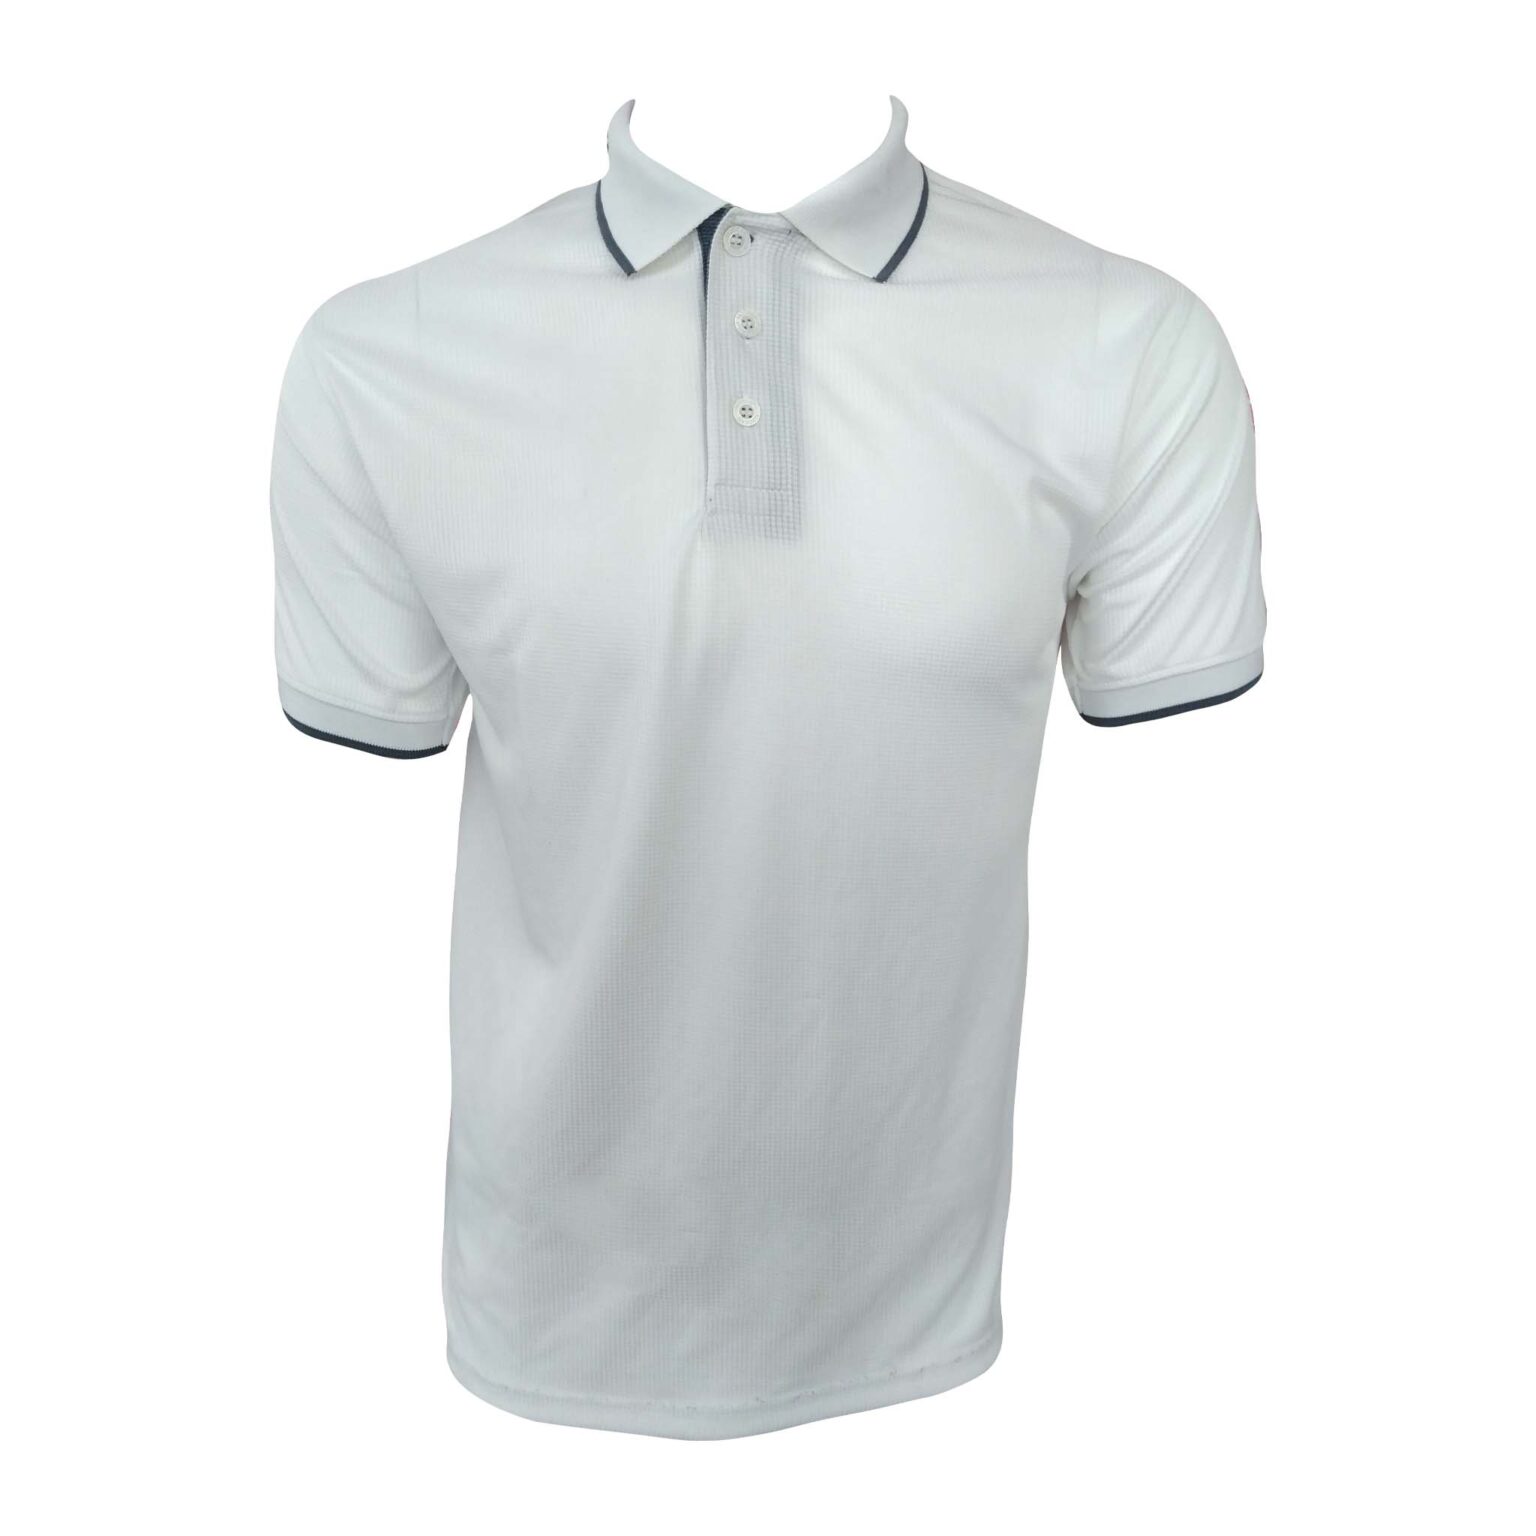 Ladies Waffle Stripe Dri Fit Polos - Miguel Moses